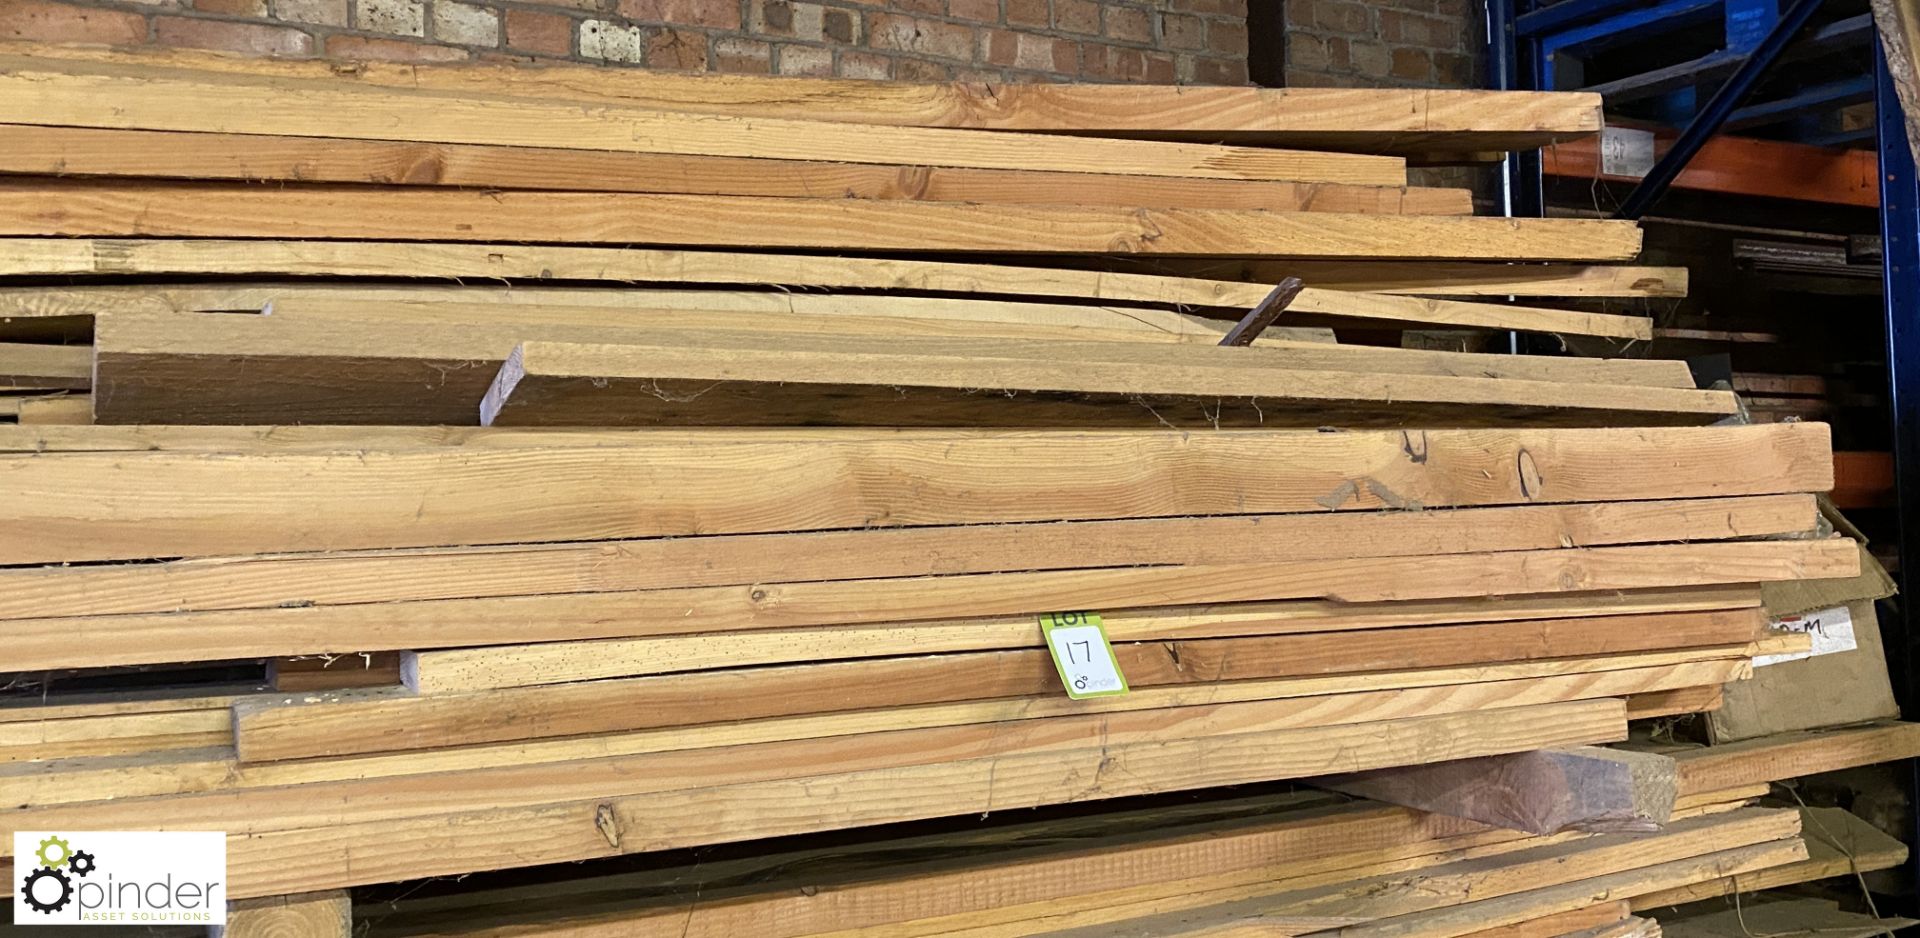 Quantity various Softwood/Hardwood Cut Boards and Lengths, to top pile